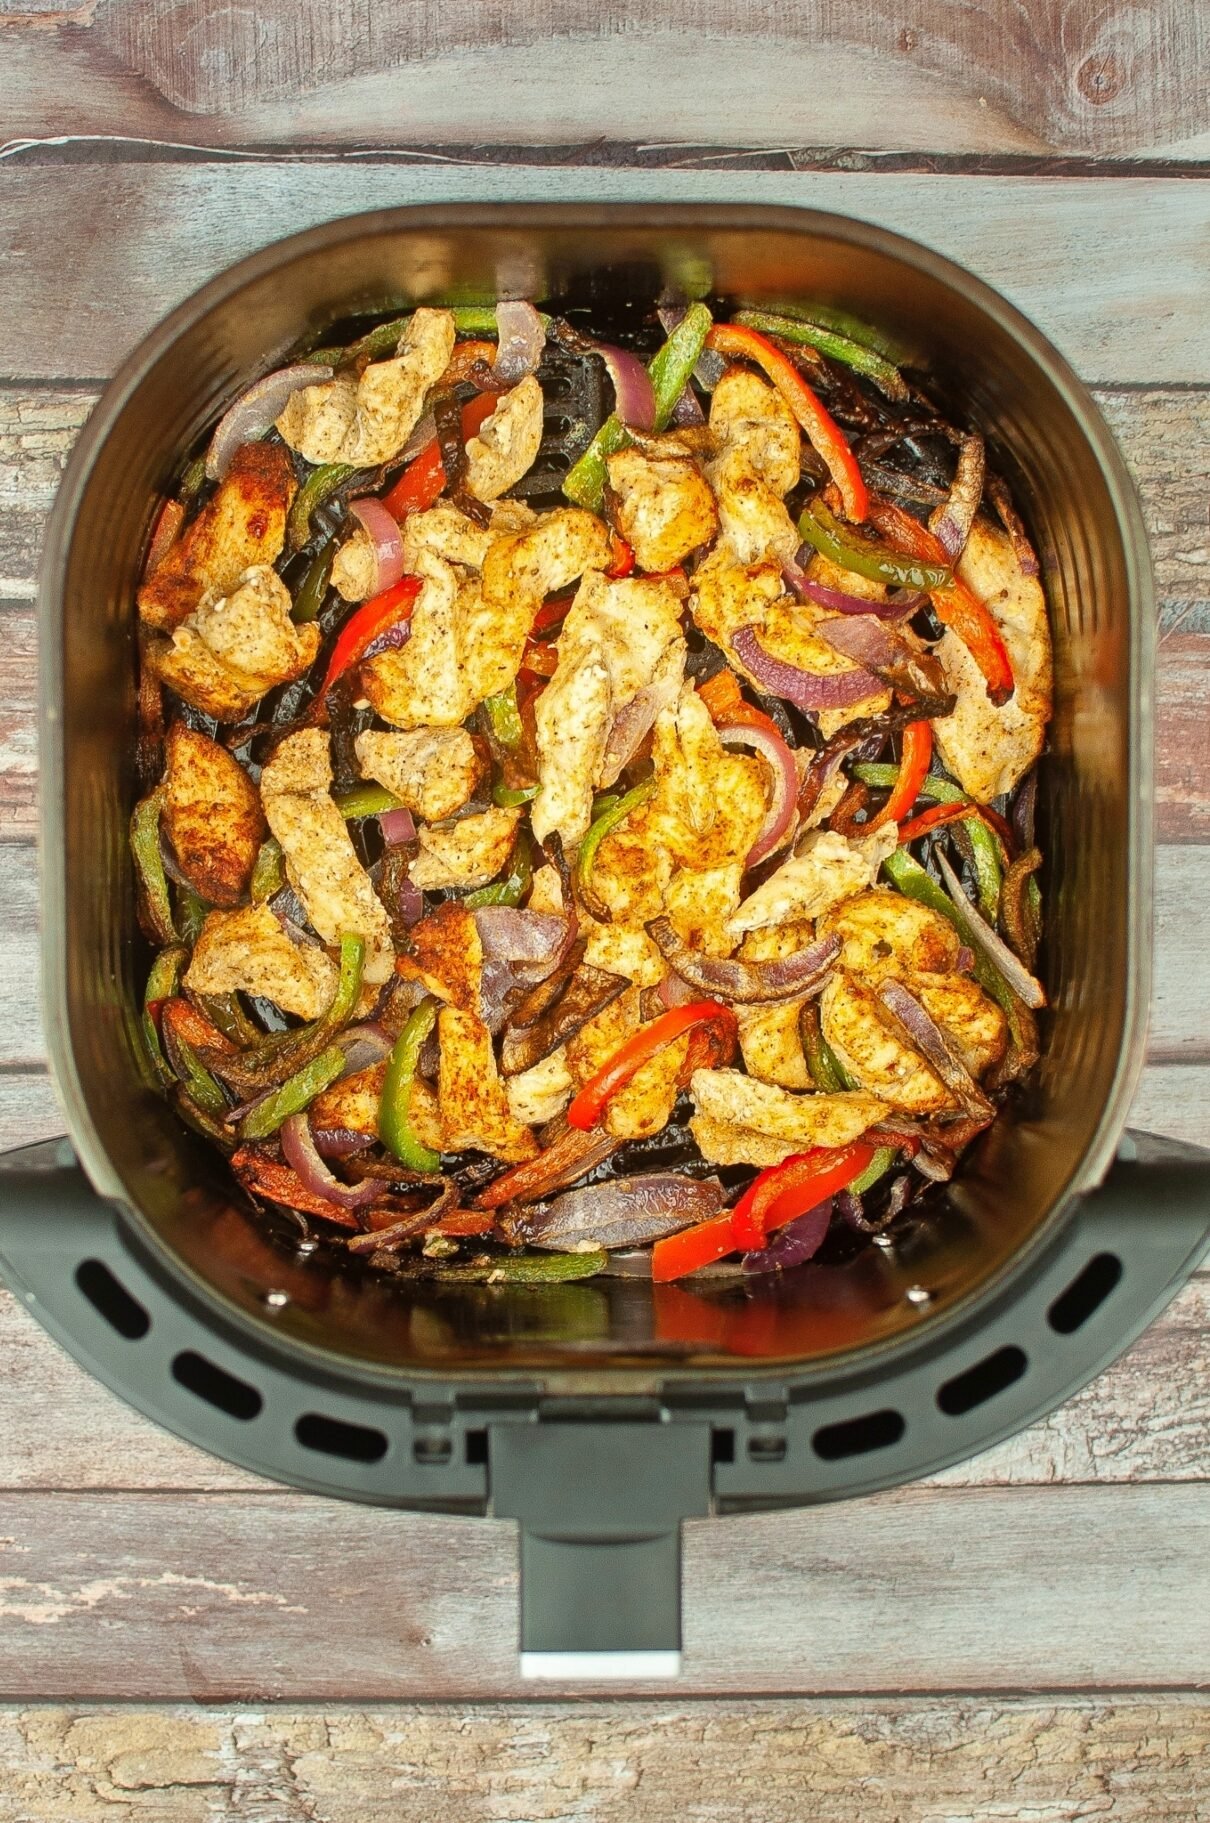 Super easy recipe for air fryer chicken fajitas - perfect for tasty weeknight dinners